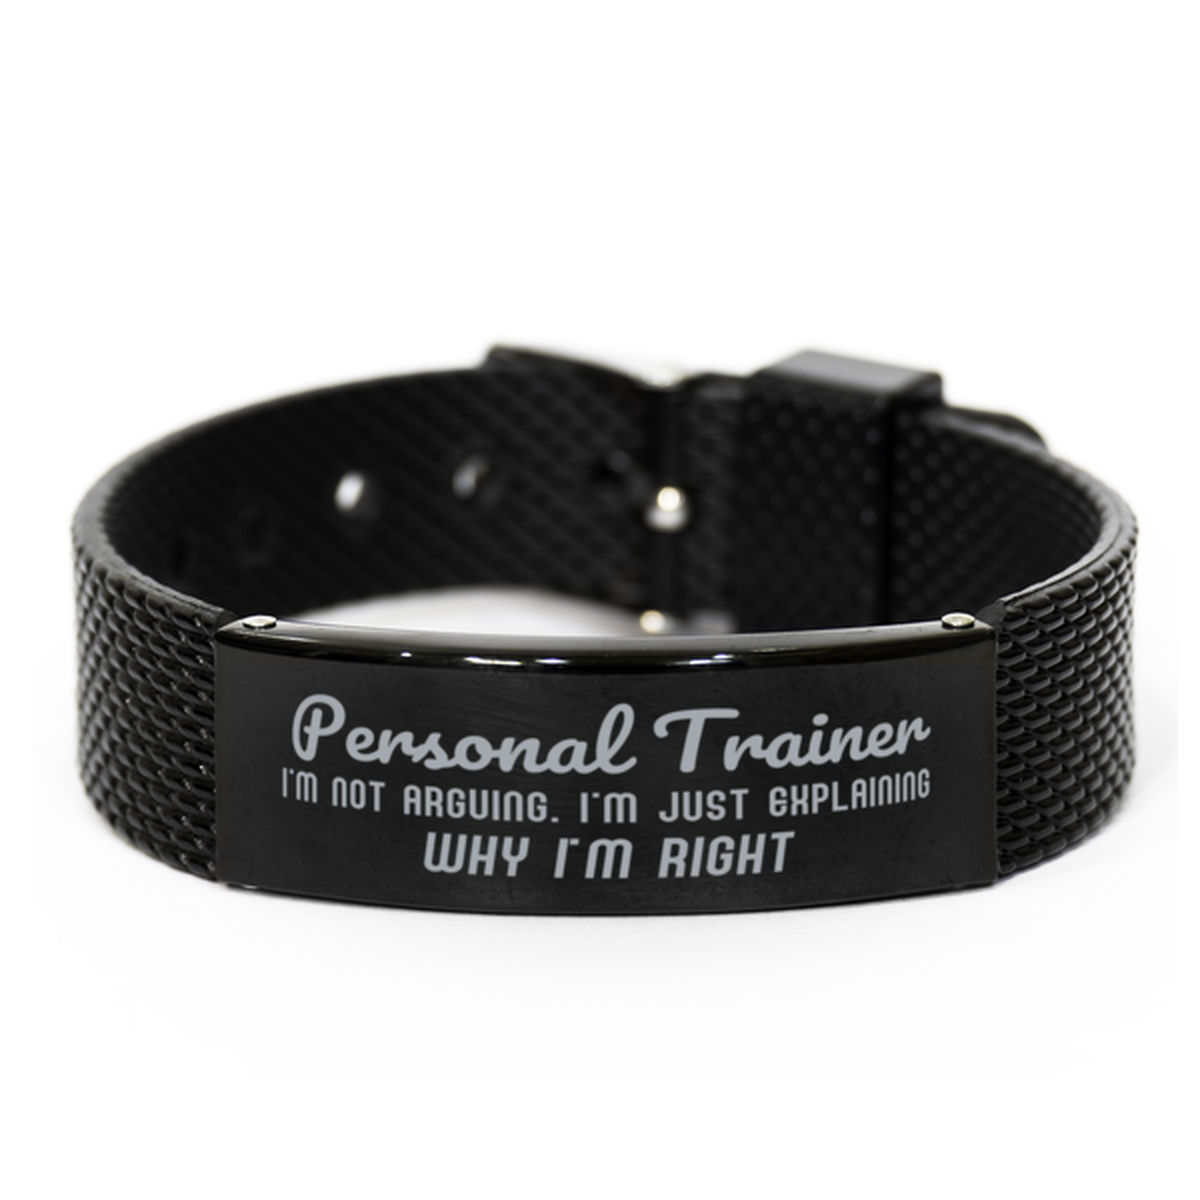 Personal Trainer I'm not Arguing. I'm Just Explaining Why I'm RIGHT Black Shark Mesh Bracelet, Funny Saying Quote Personal Trainer Gifts For Personal Trainer Graduation Birthday Christmas Gifts for Men Women Coworker